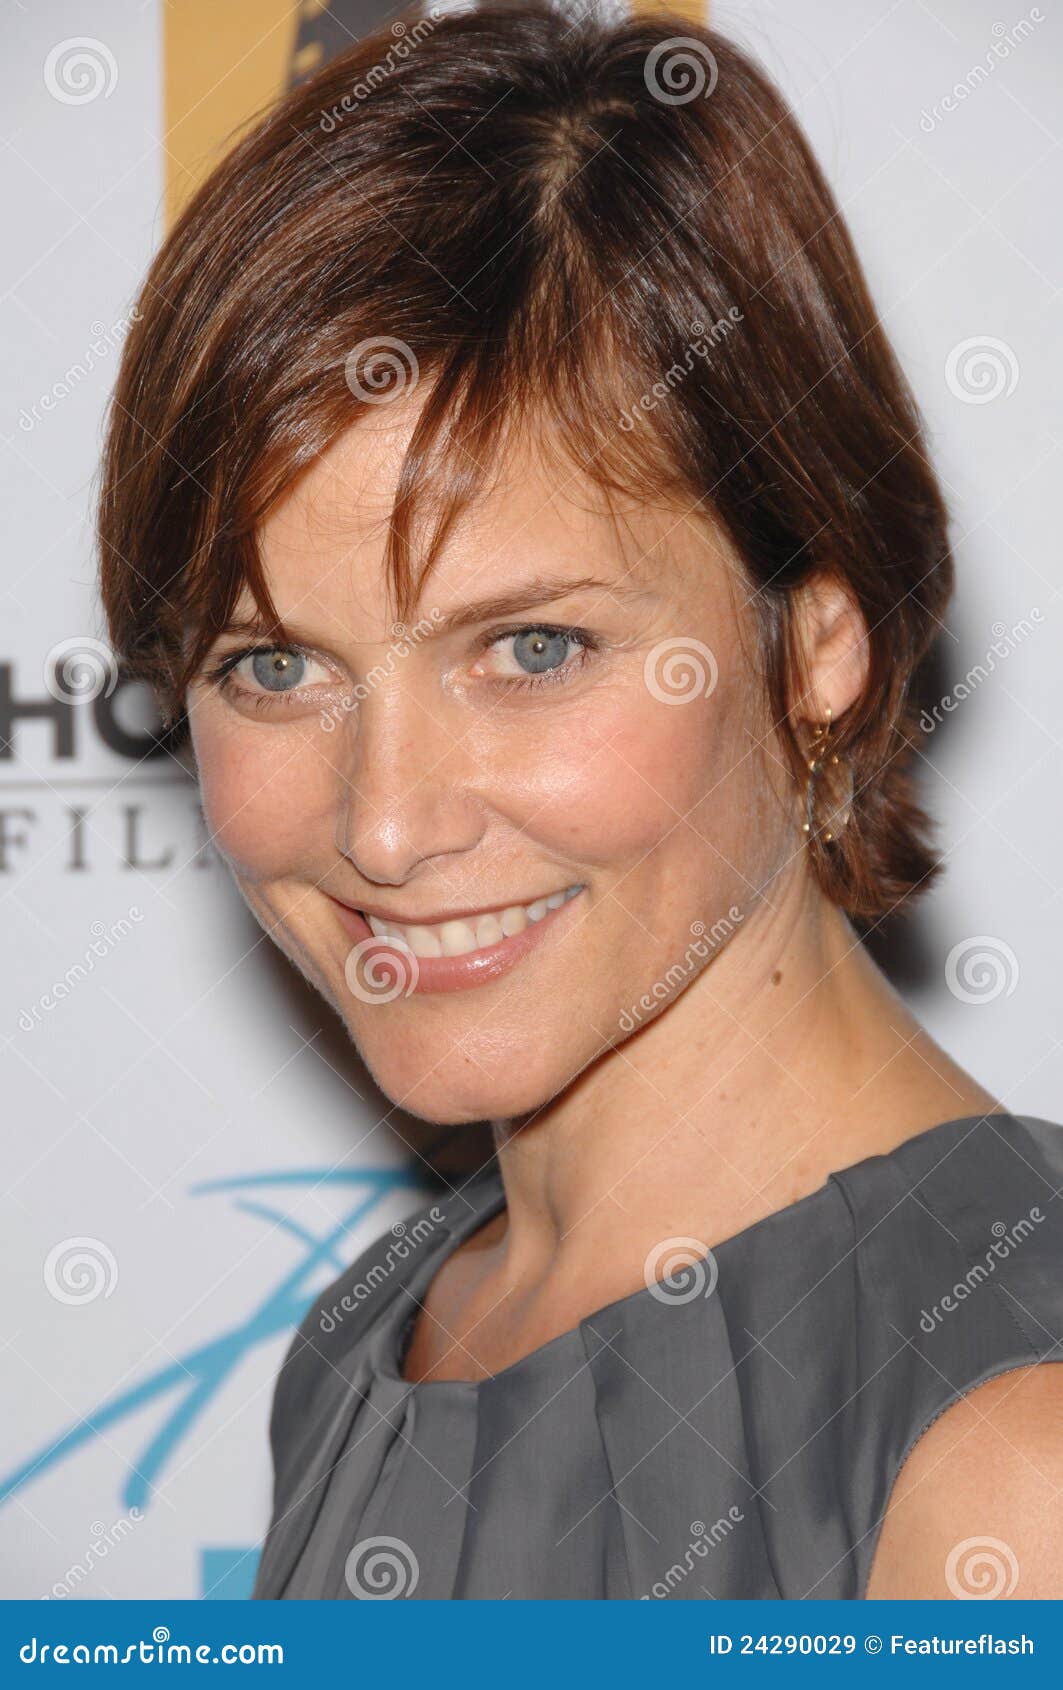 Who is carey lowell